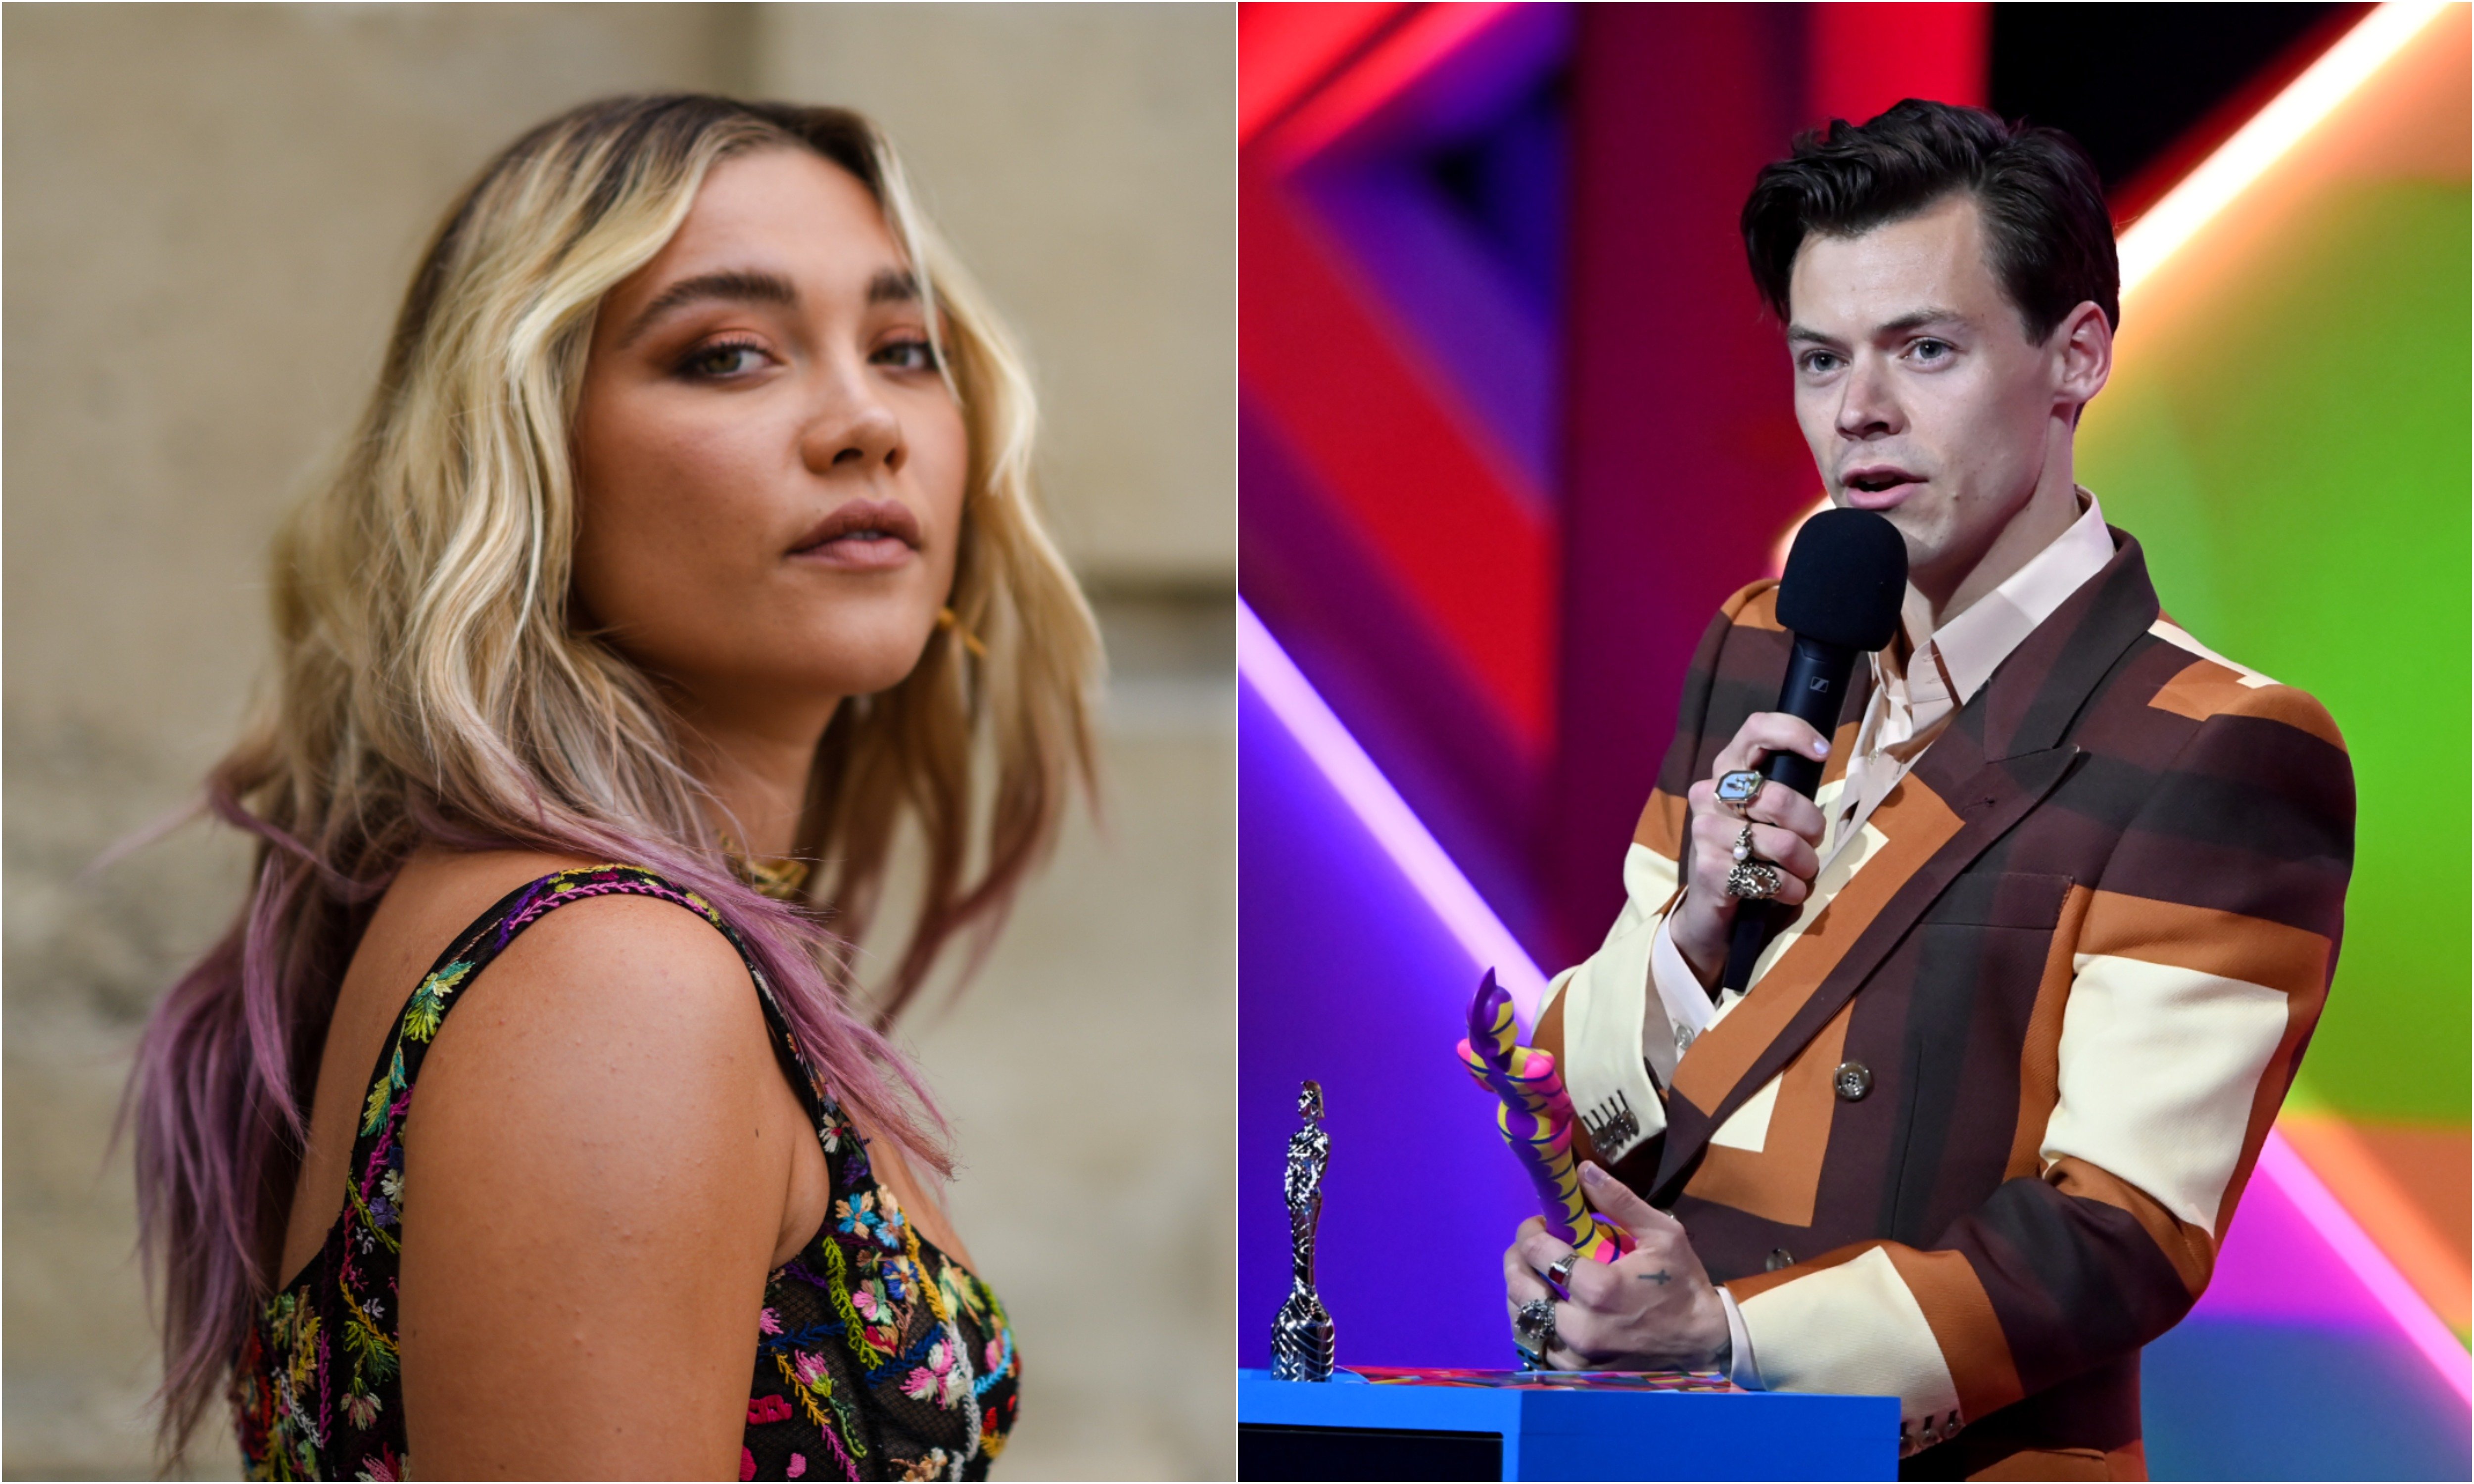 A joined photo of Florence Pugh and Harry Styles